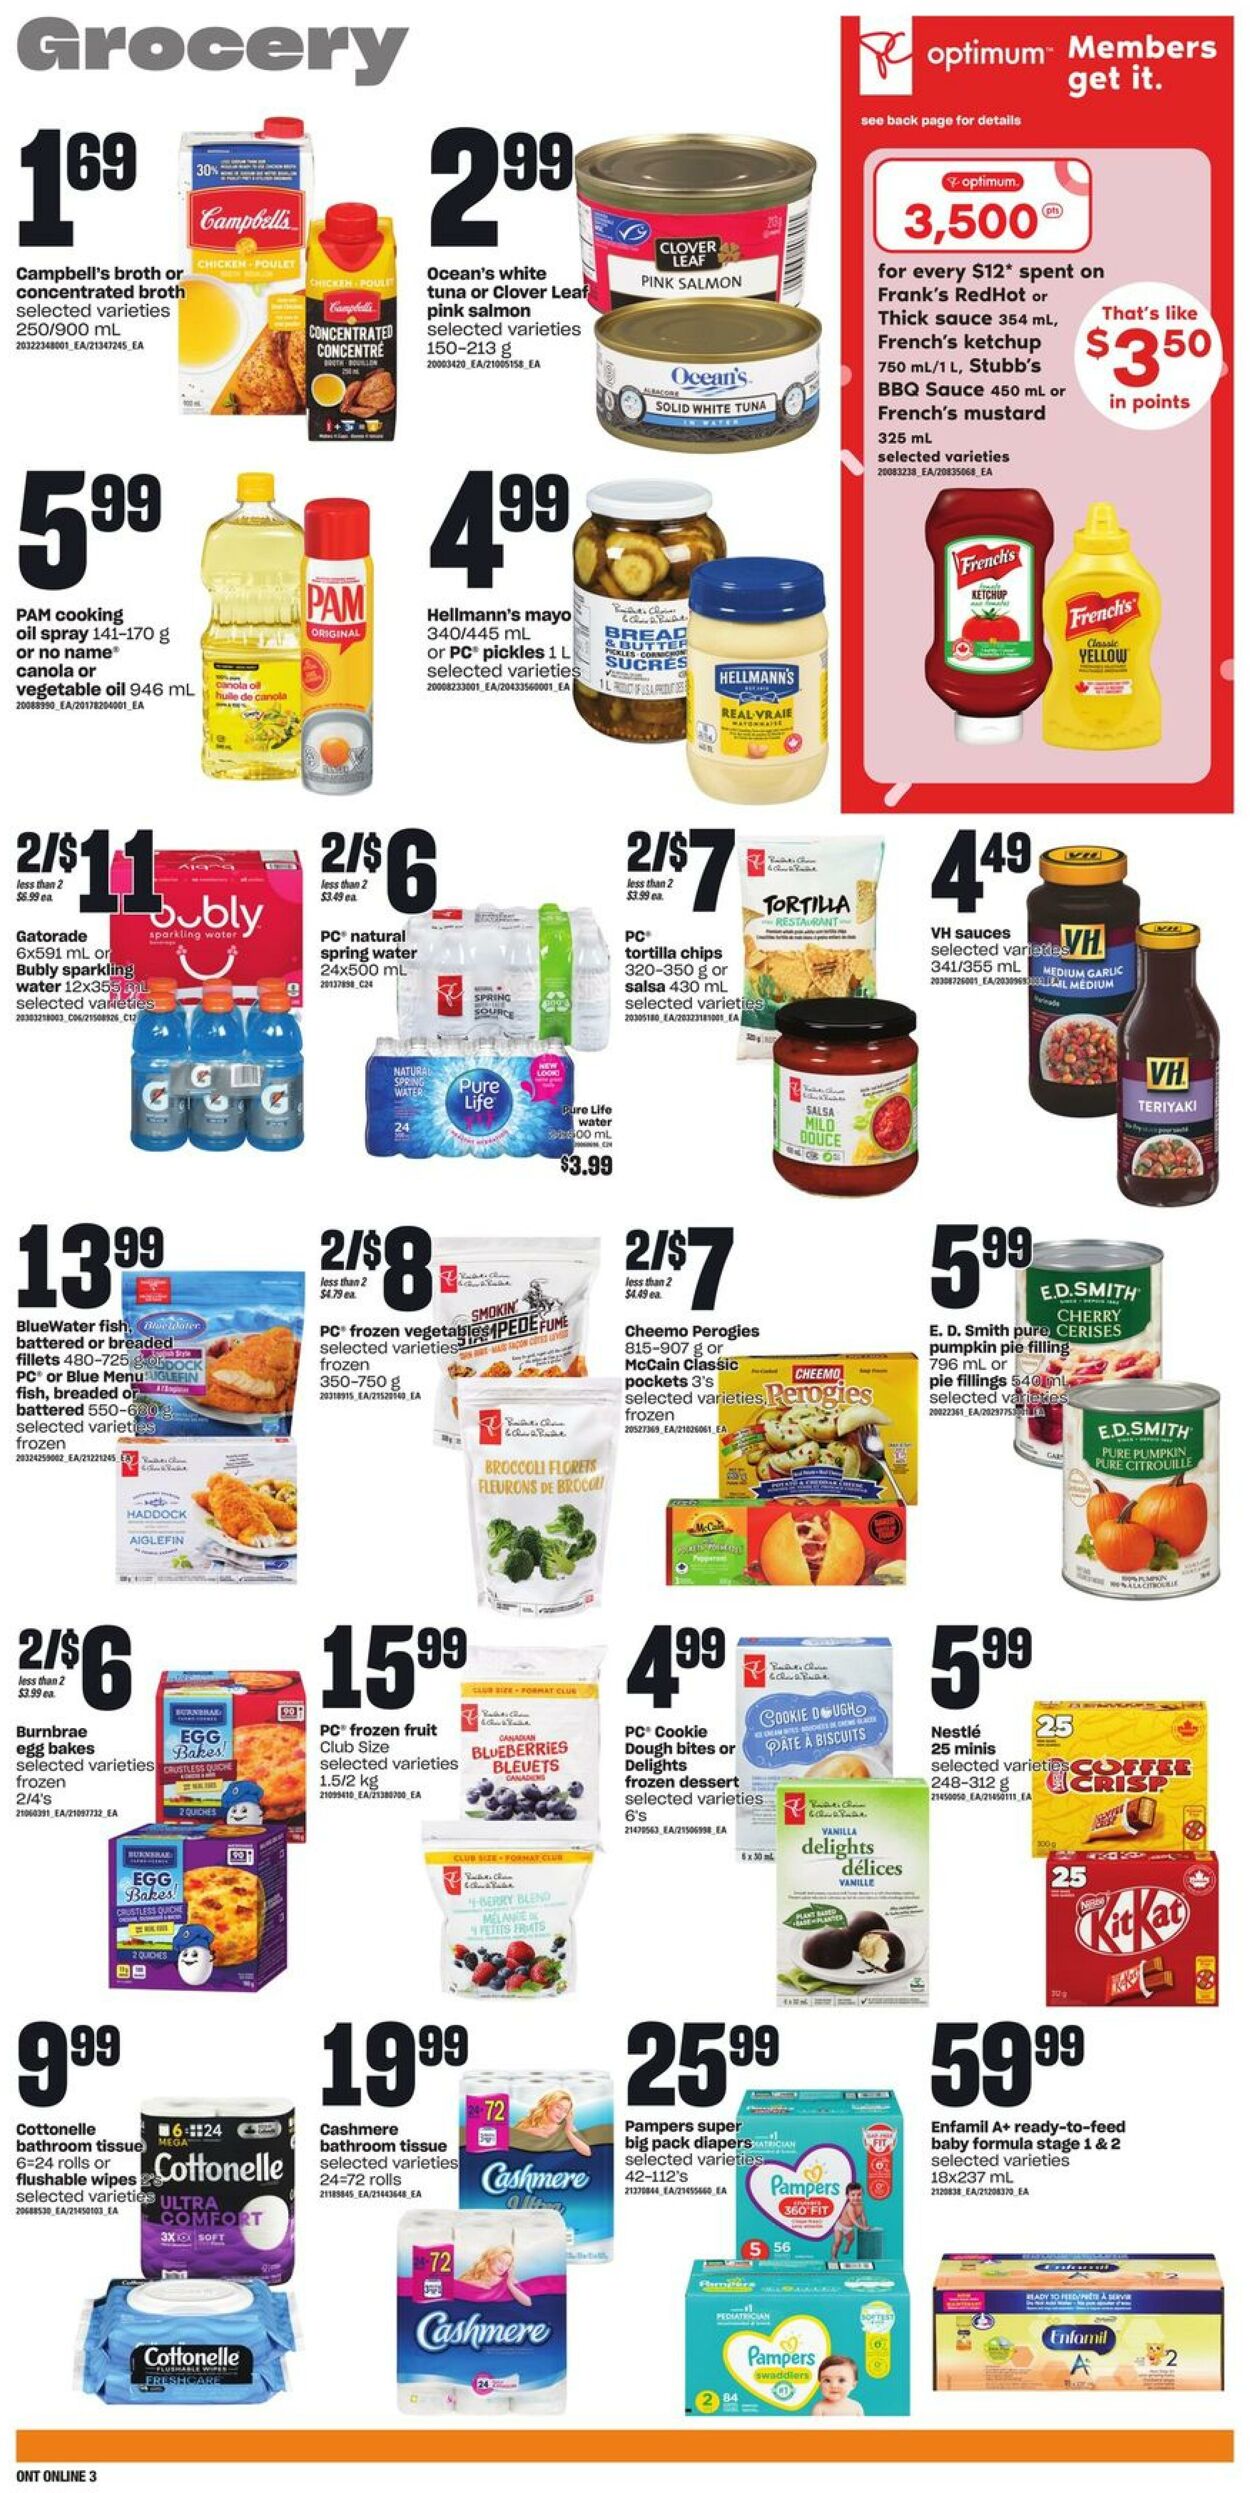 Zehrs Flyer from 09/14/2023